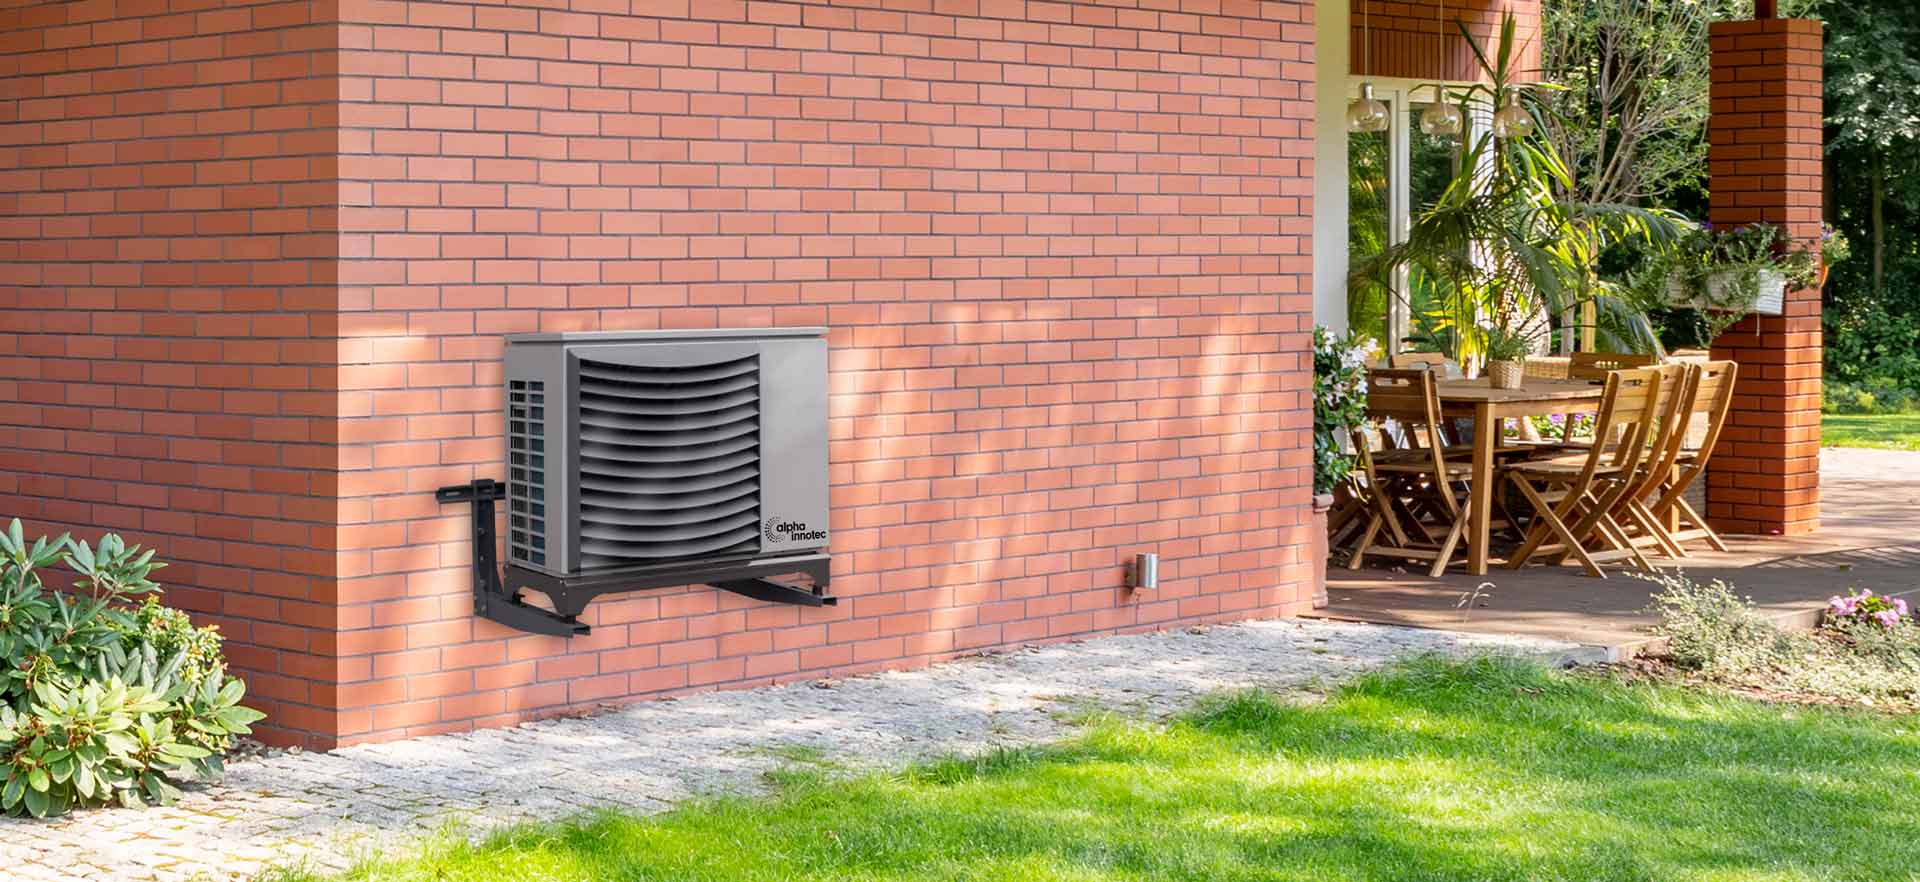 The air/water-heatpump "Jersey" is attached outdoors to a house wall, reaching into a garden.